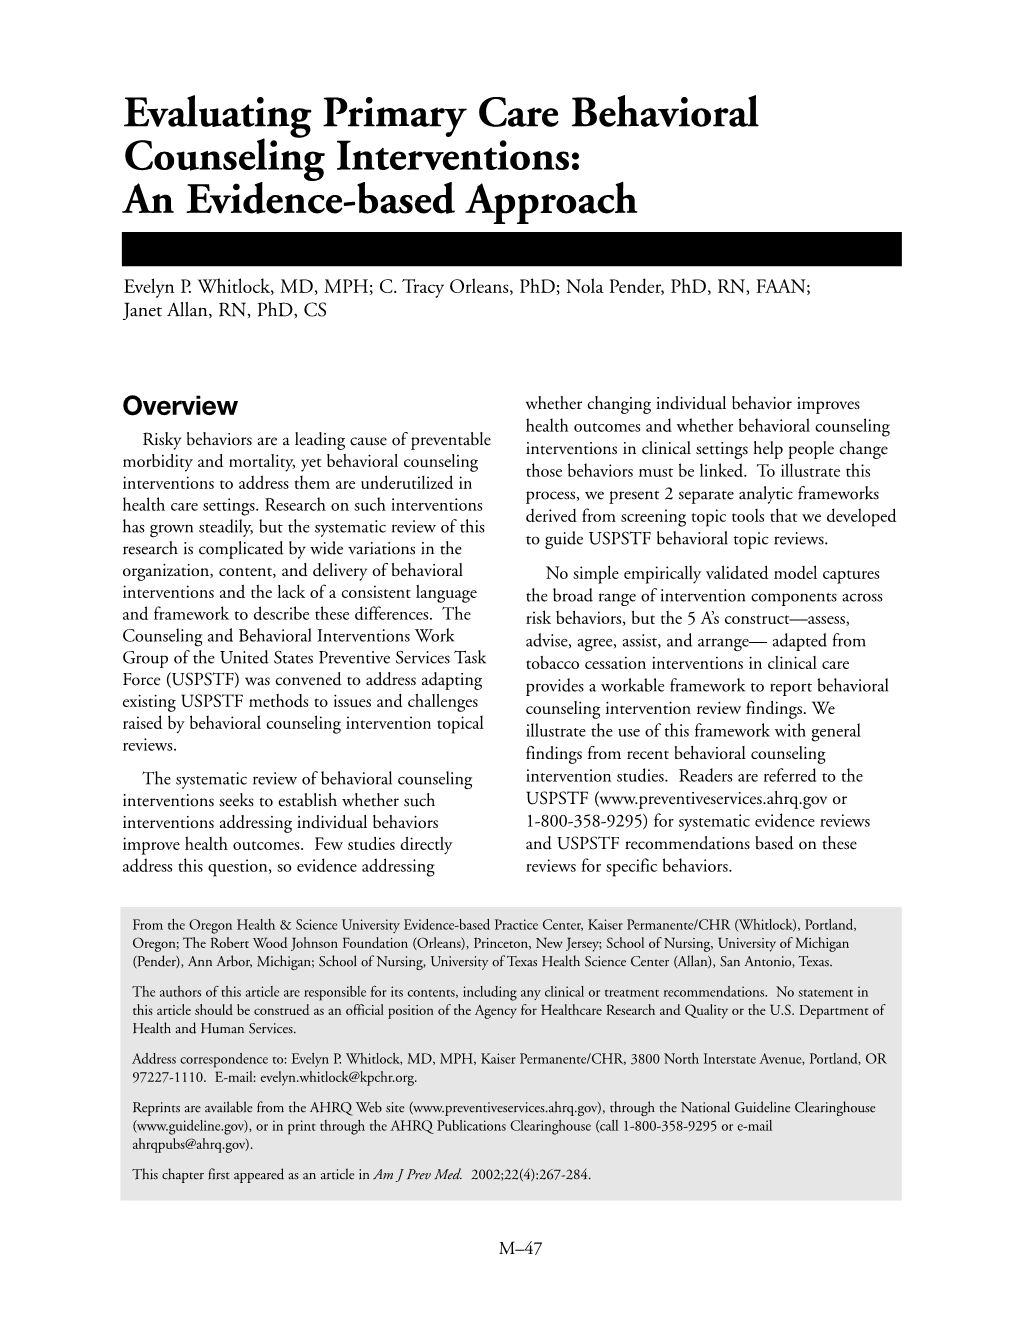 Evaluating Primary Care Behavioral Counseling Interventions: an Evidence-Based Approach